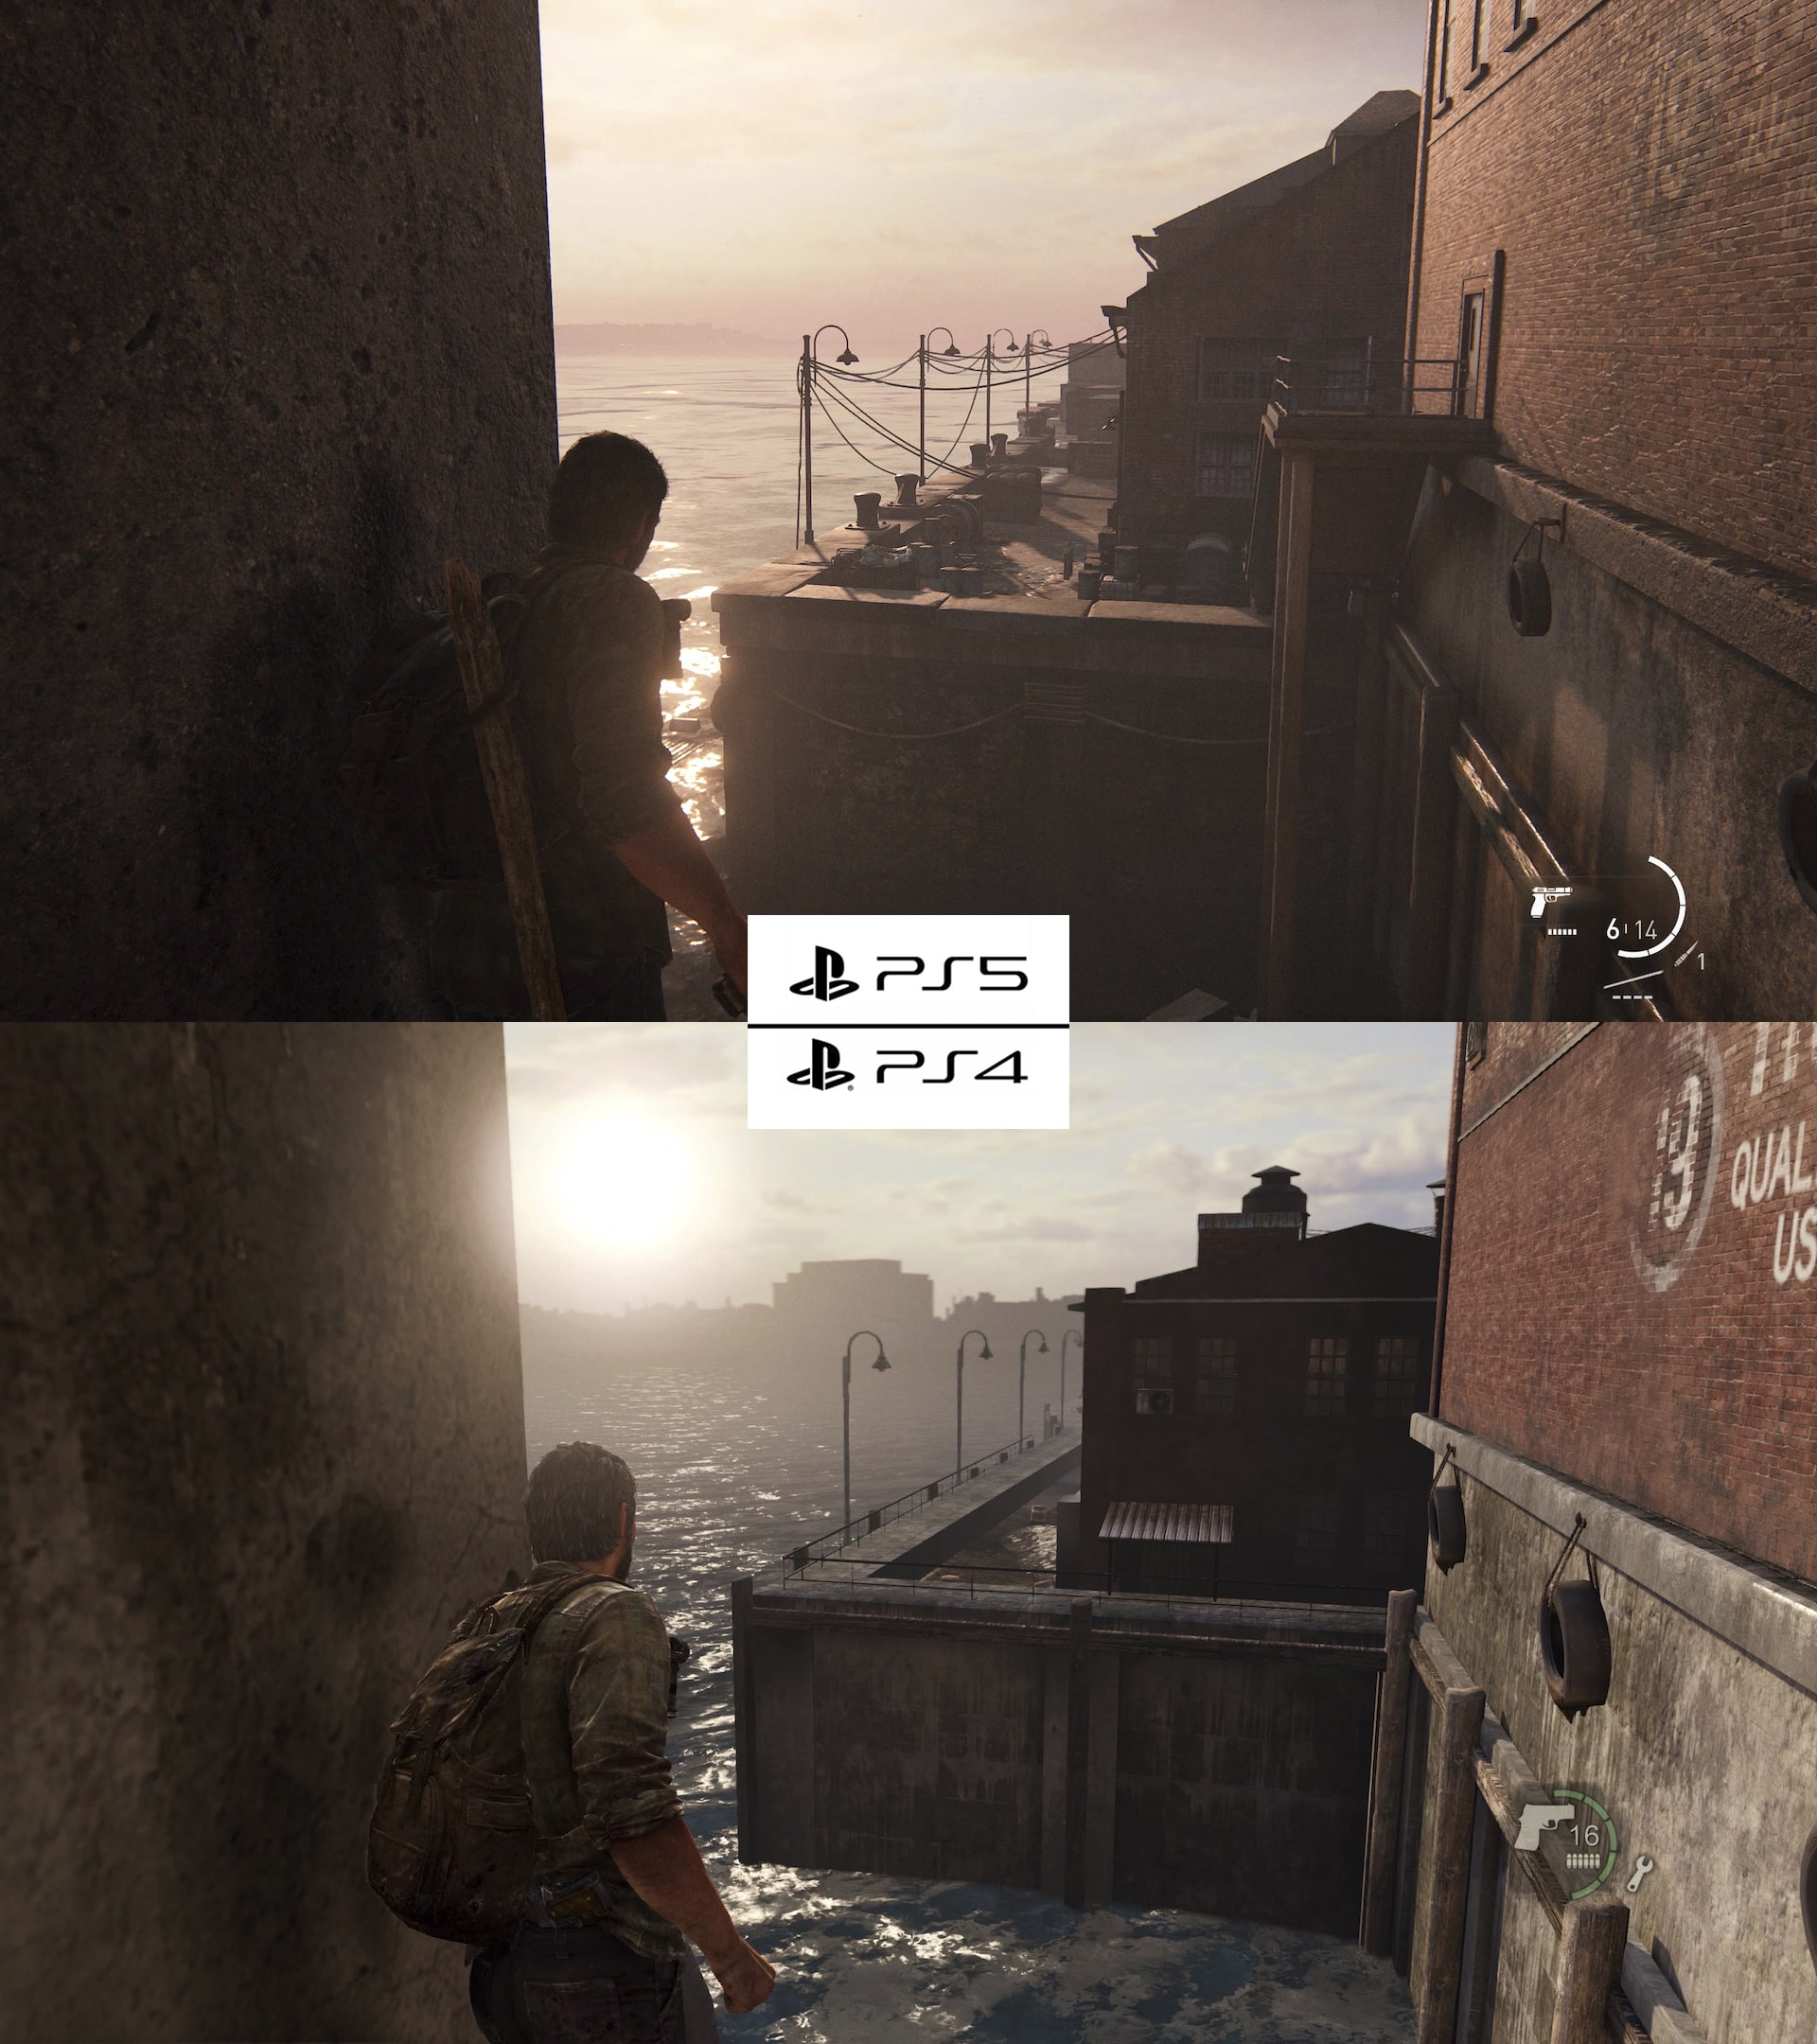 Julien  on X: Sarah - The Last of us (PS4) vs The Last of us part 1  (PS5). #THELASTOFUS #PS5 🎮  / X